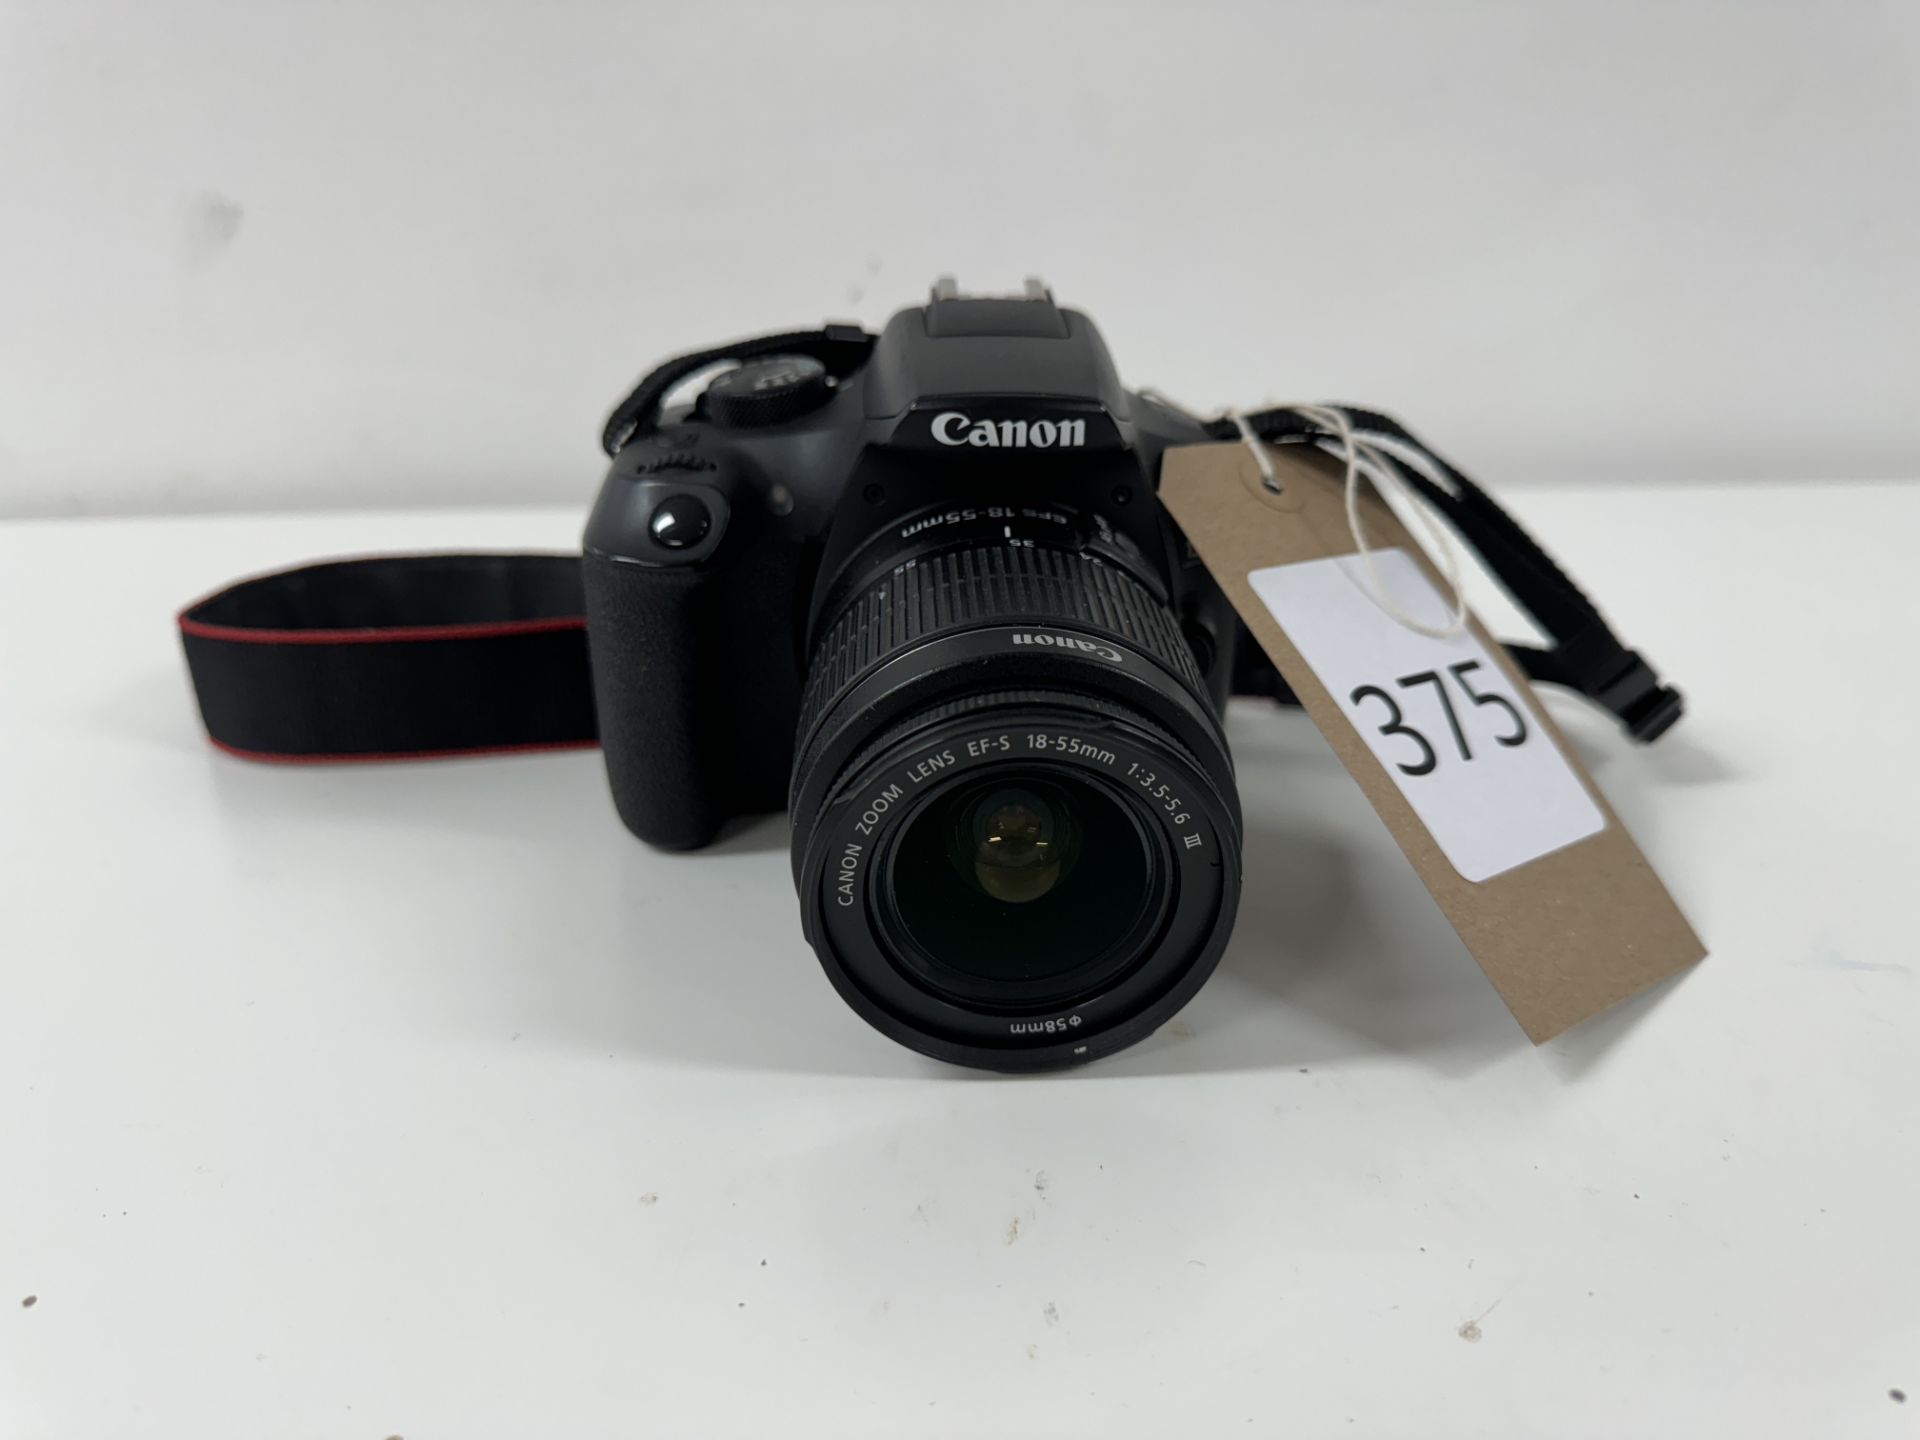 Canon DS12662 DSLR Camera, Serial Number 123072035524 with Canon Zoom Lens EF-S 18-55mm 1:3.5-5.6